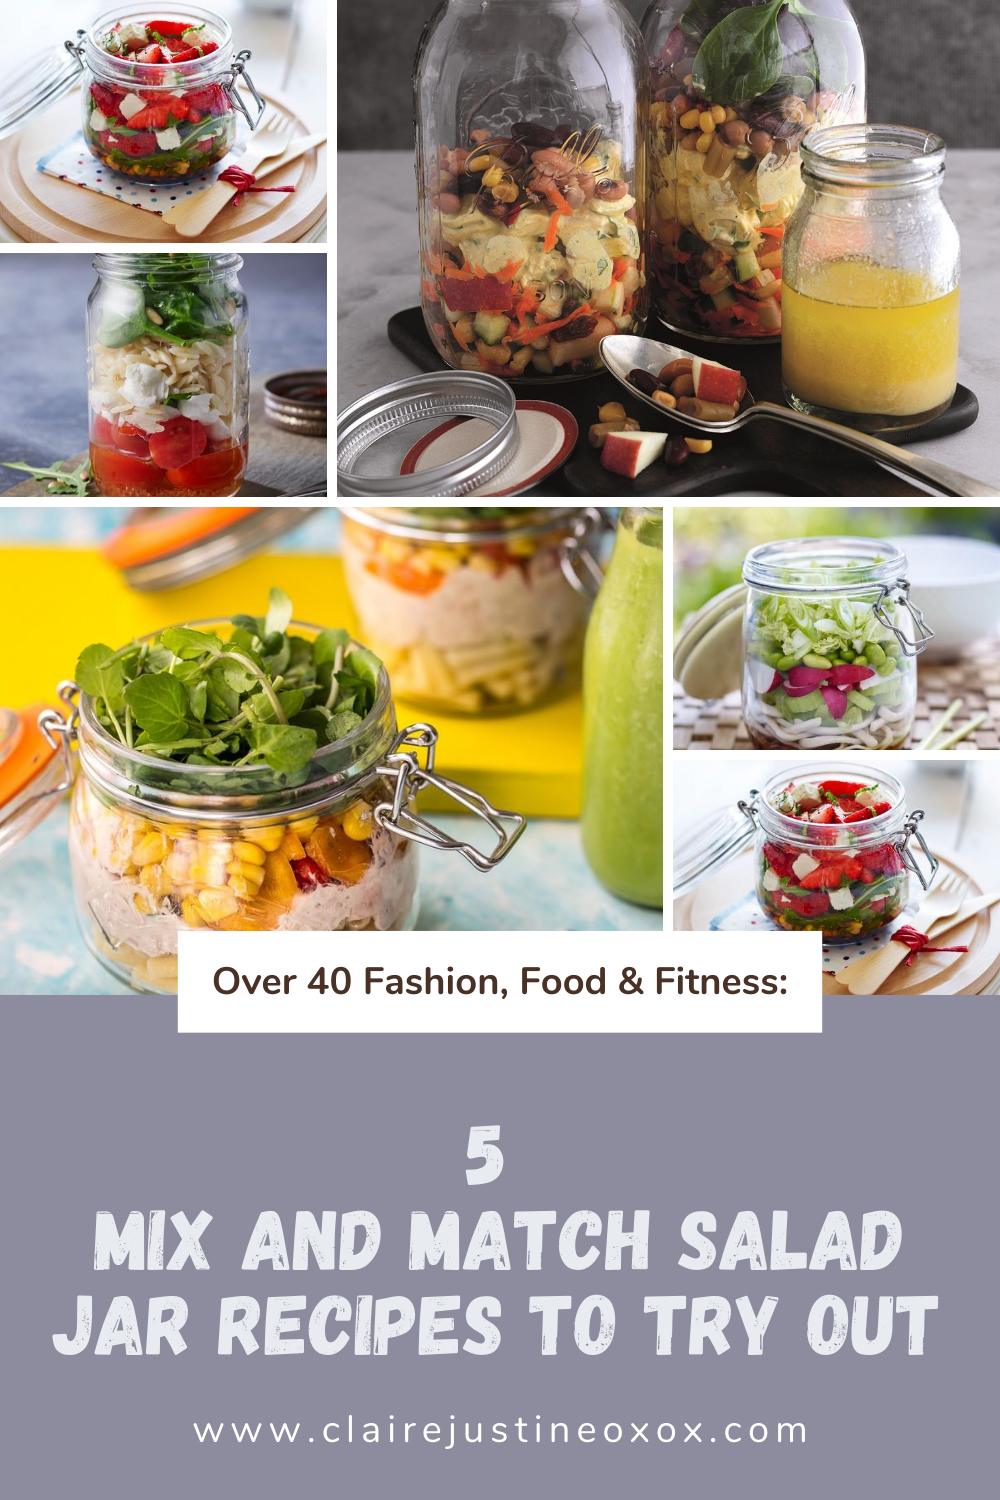 5 Mix And Match Salad Jar Recipes To Try Out